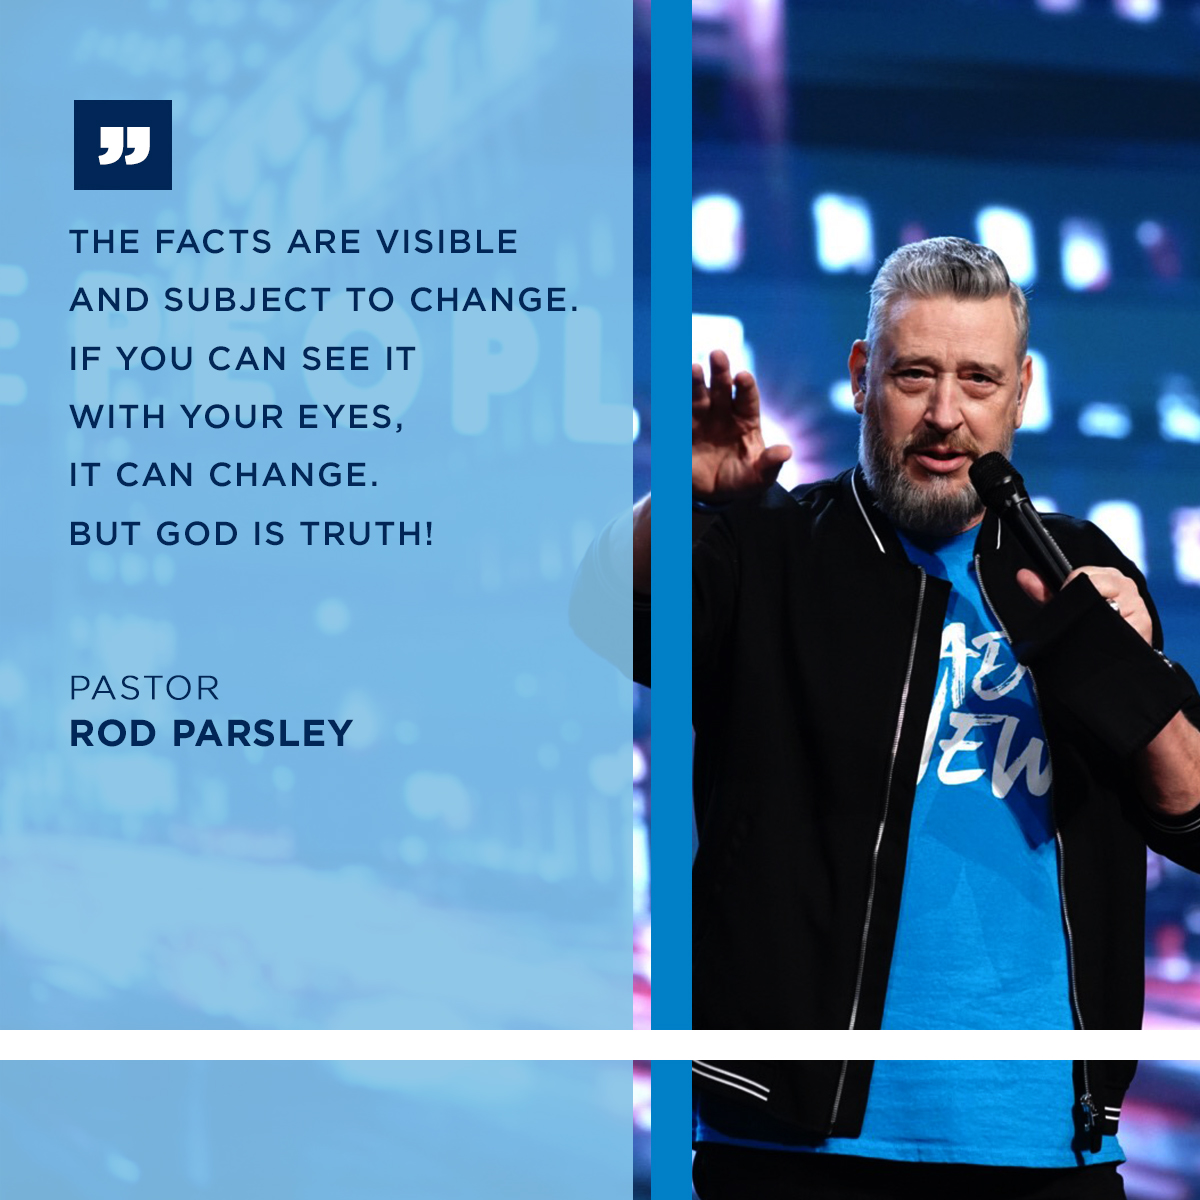 “The facts are visible and subject to change. If you can see it with your five senses, it can change. But God is truth!” – Pastor Rod Parsley